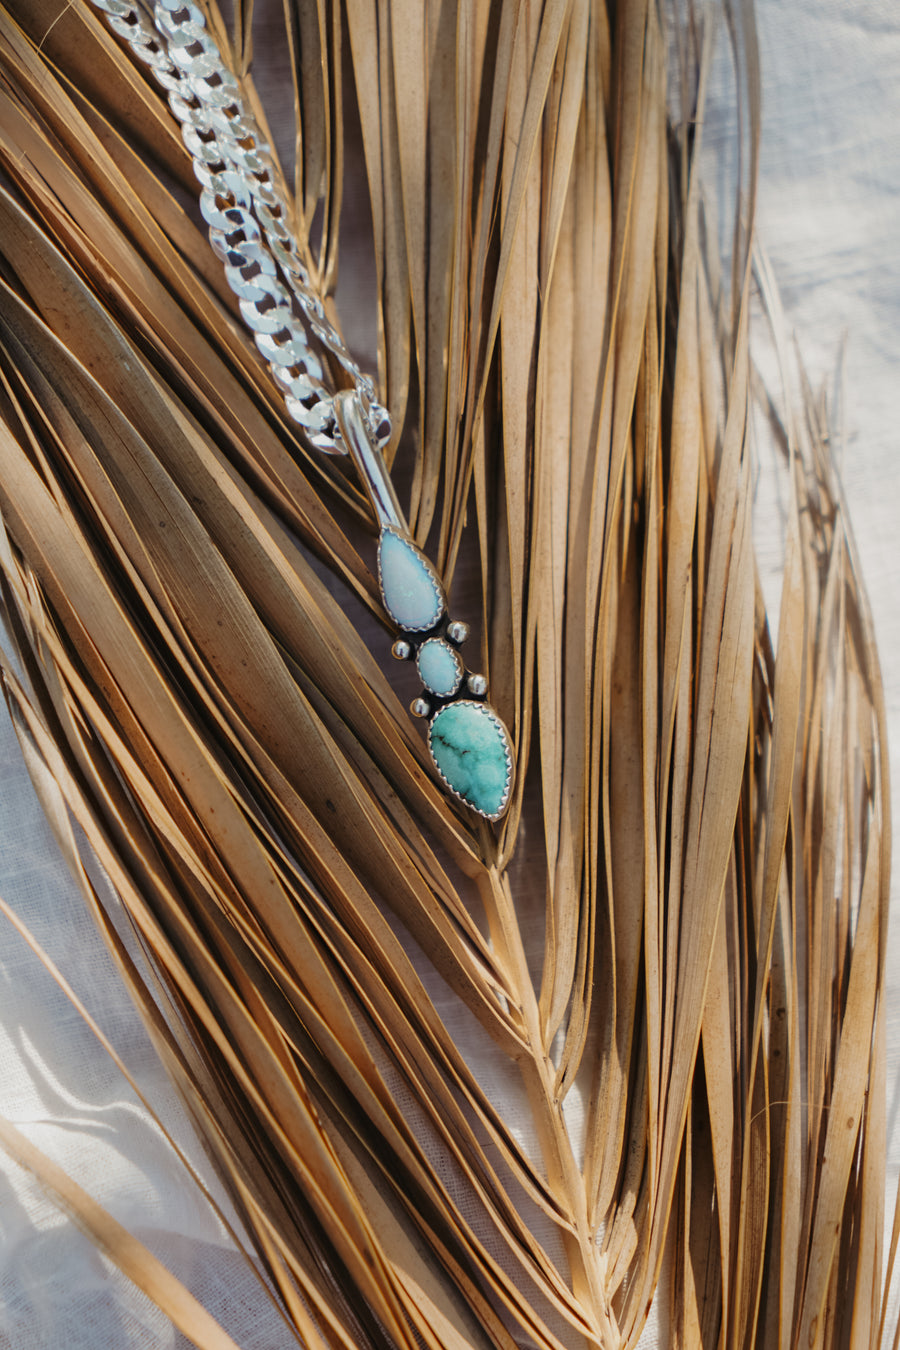 The Chrysalis Necklace in Larimar, Hubei Turquoise, & Sterling Opal